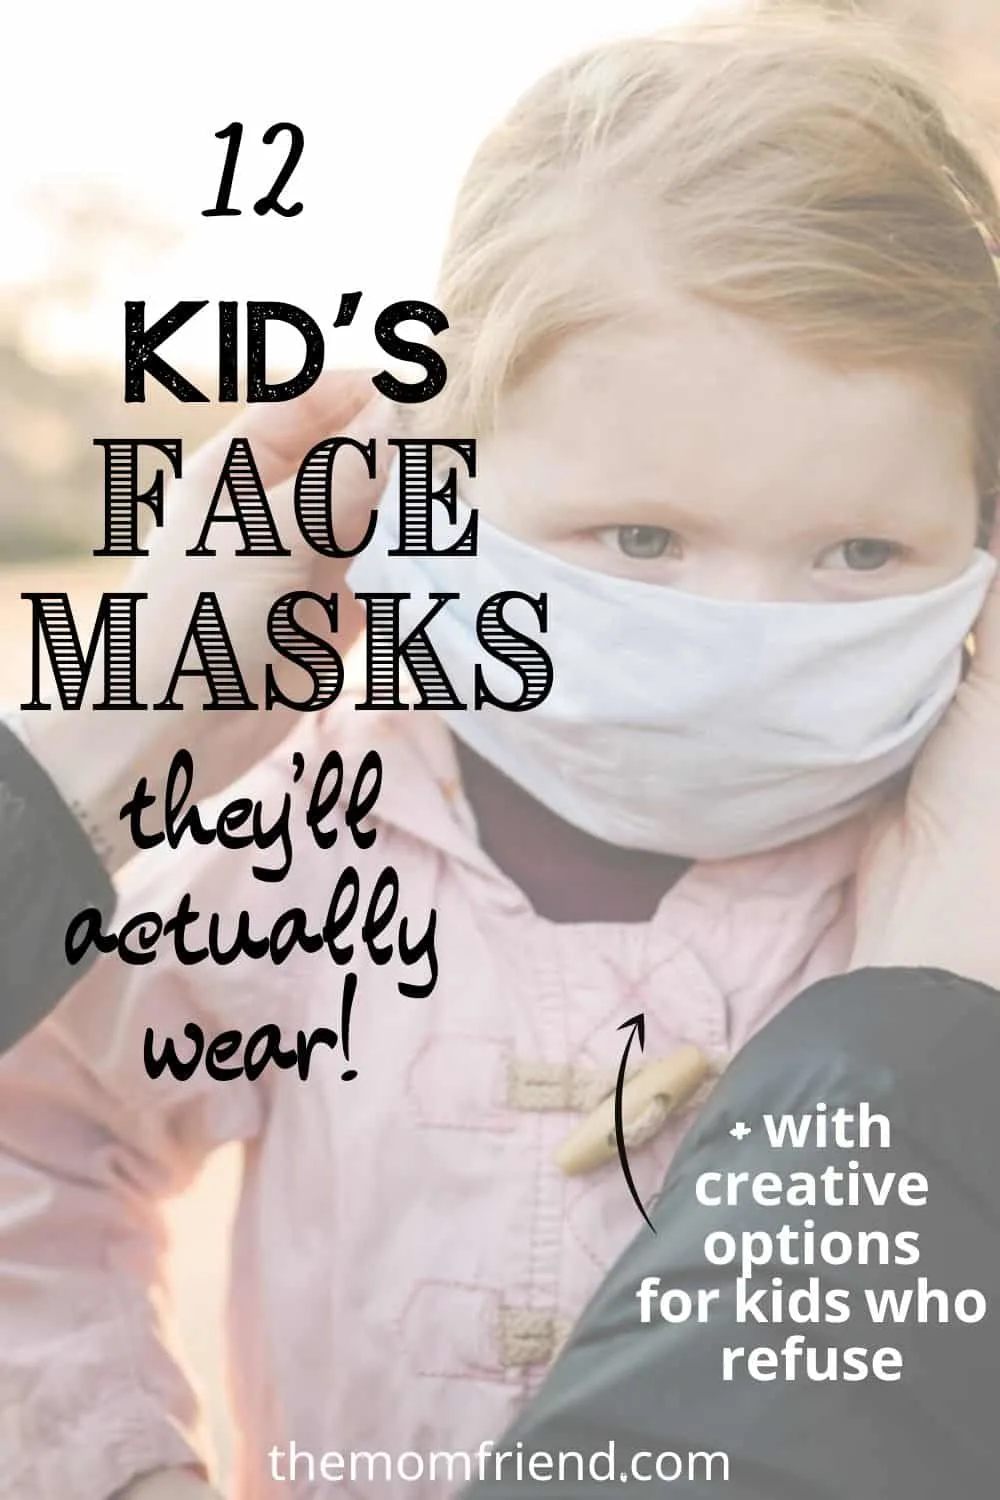 kids face masks in text with toddler wearing one